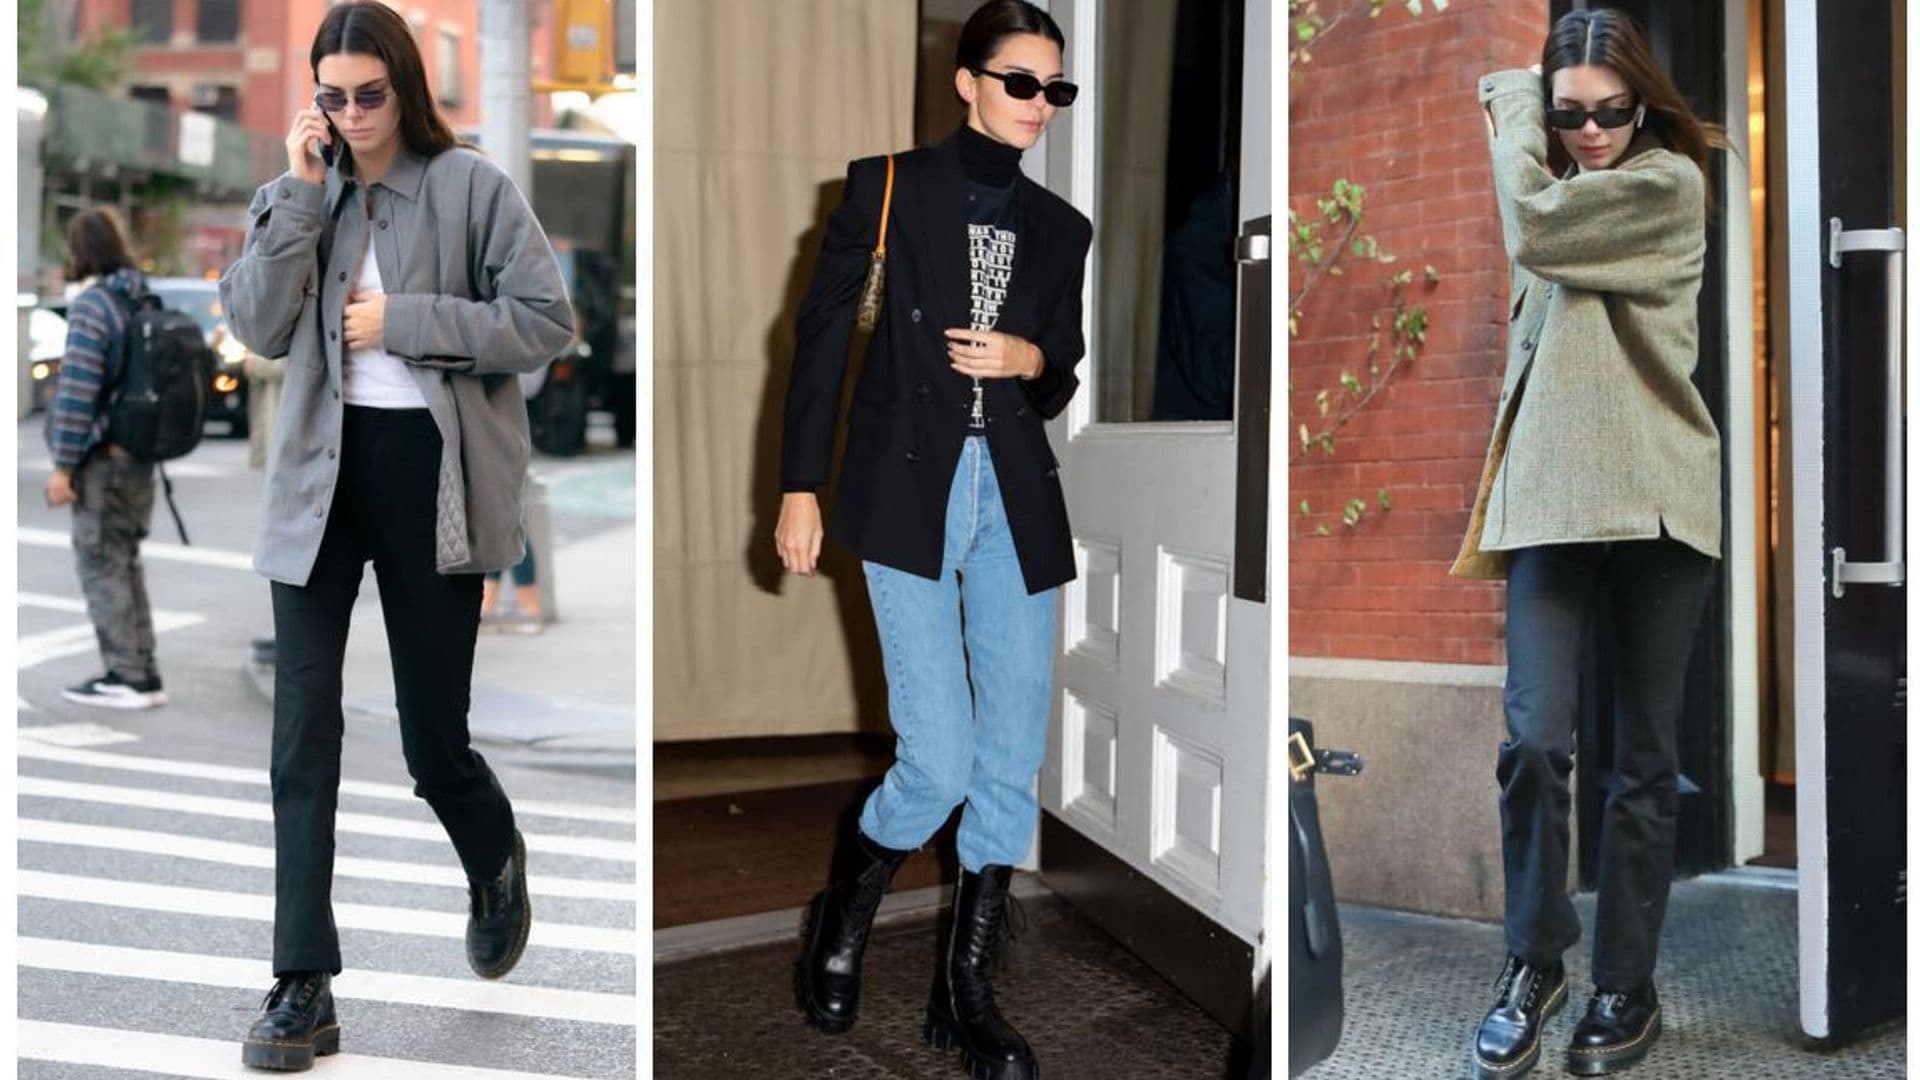 Kendall Jenner shows how to wear the combat boot trend in three different ways